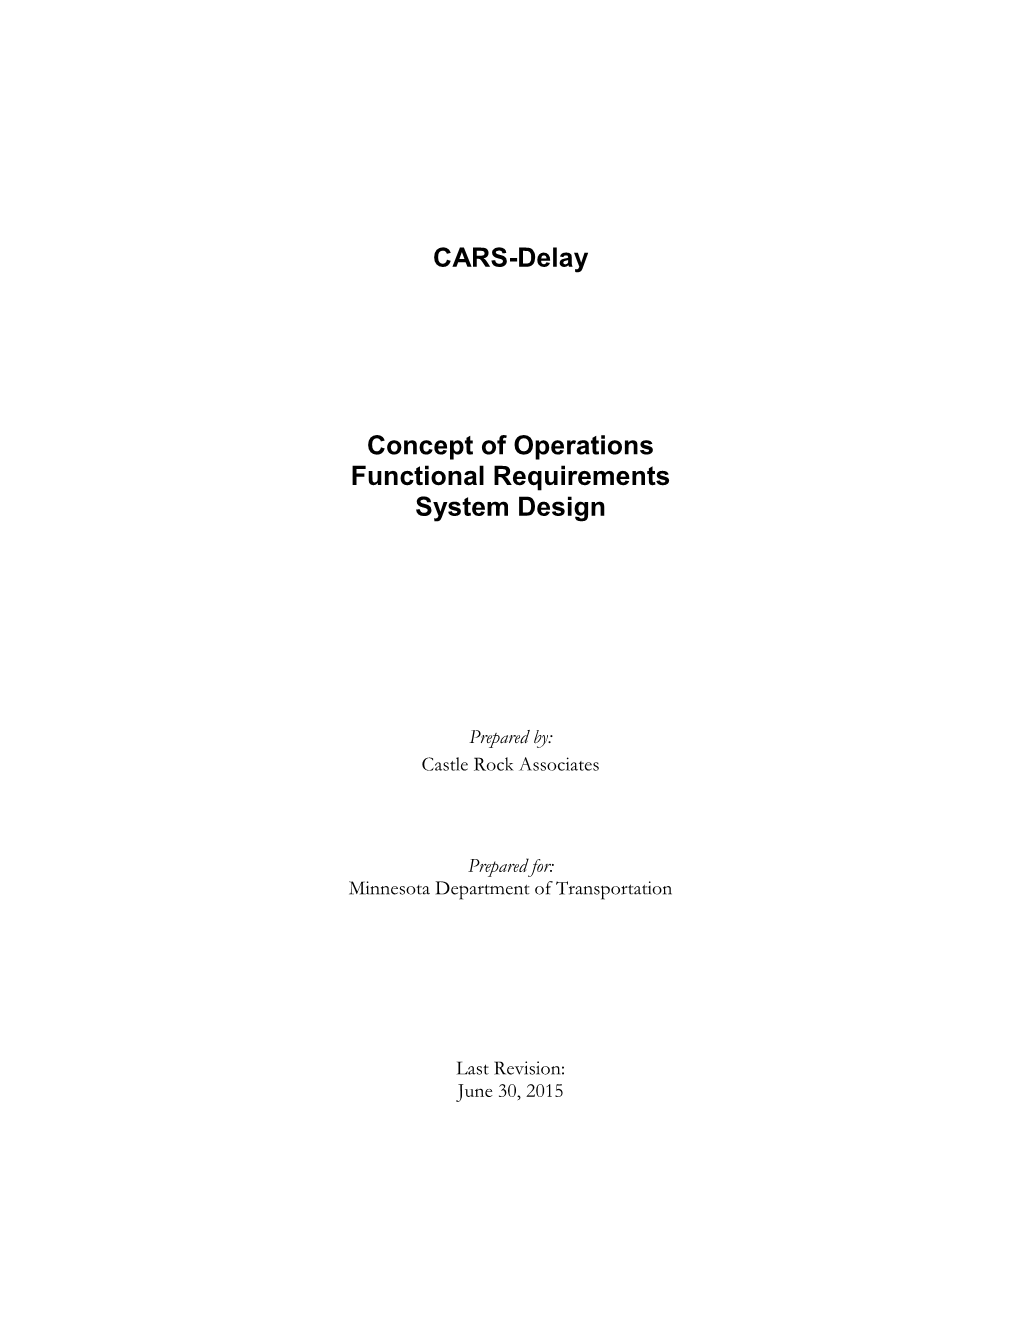 CARS-Delay Concept of Operations Functional Requirements System